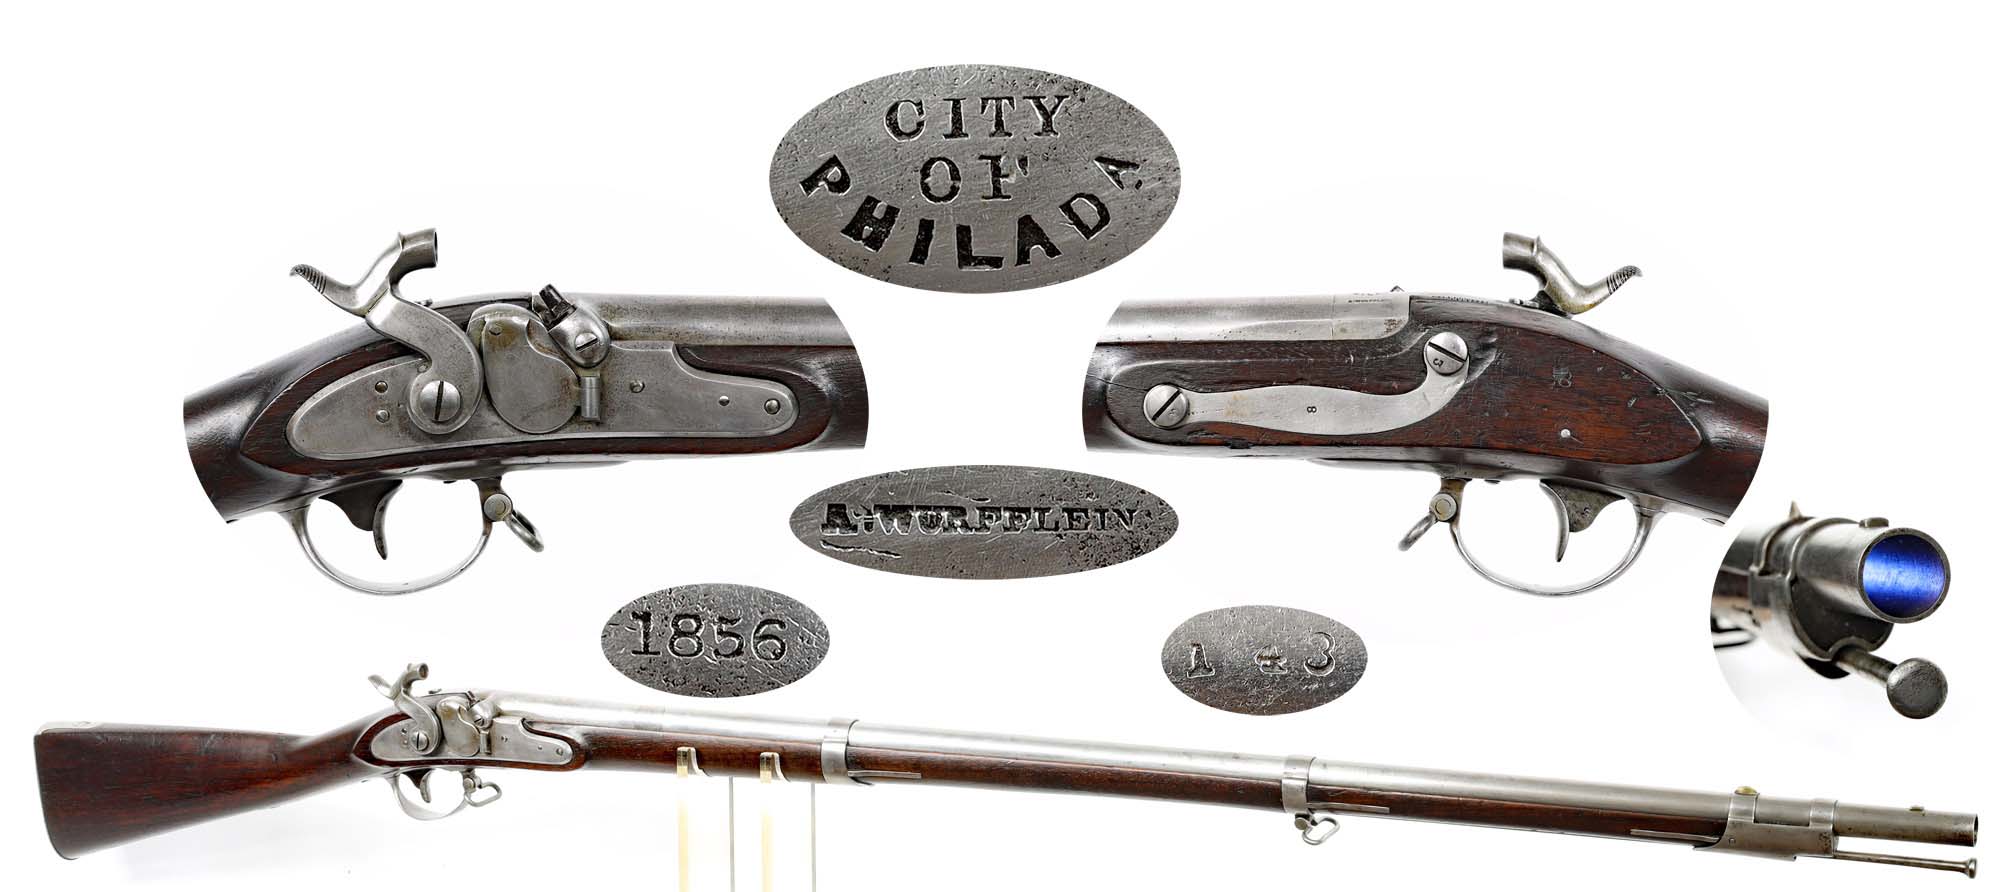 Image of City of Philadelphia Home Guard M1816 Percussion Conversion Musket